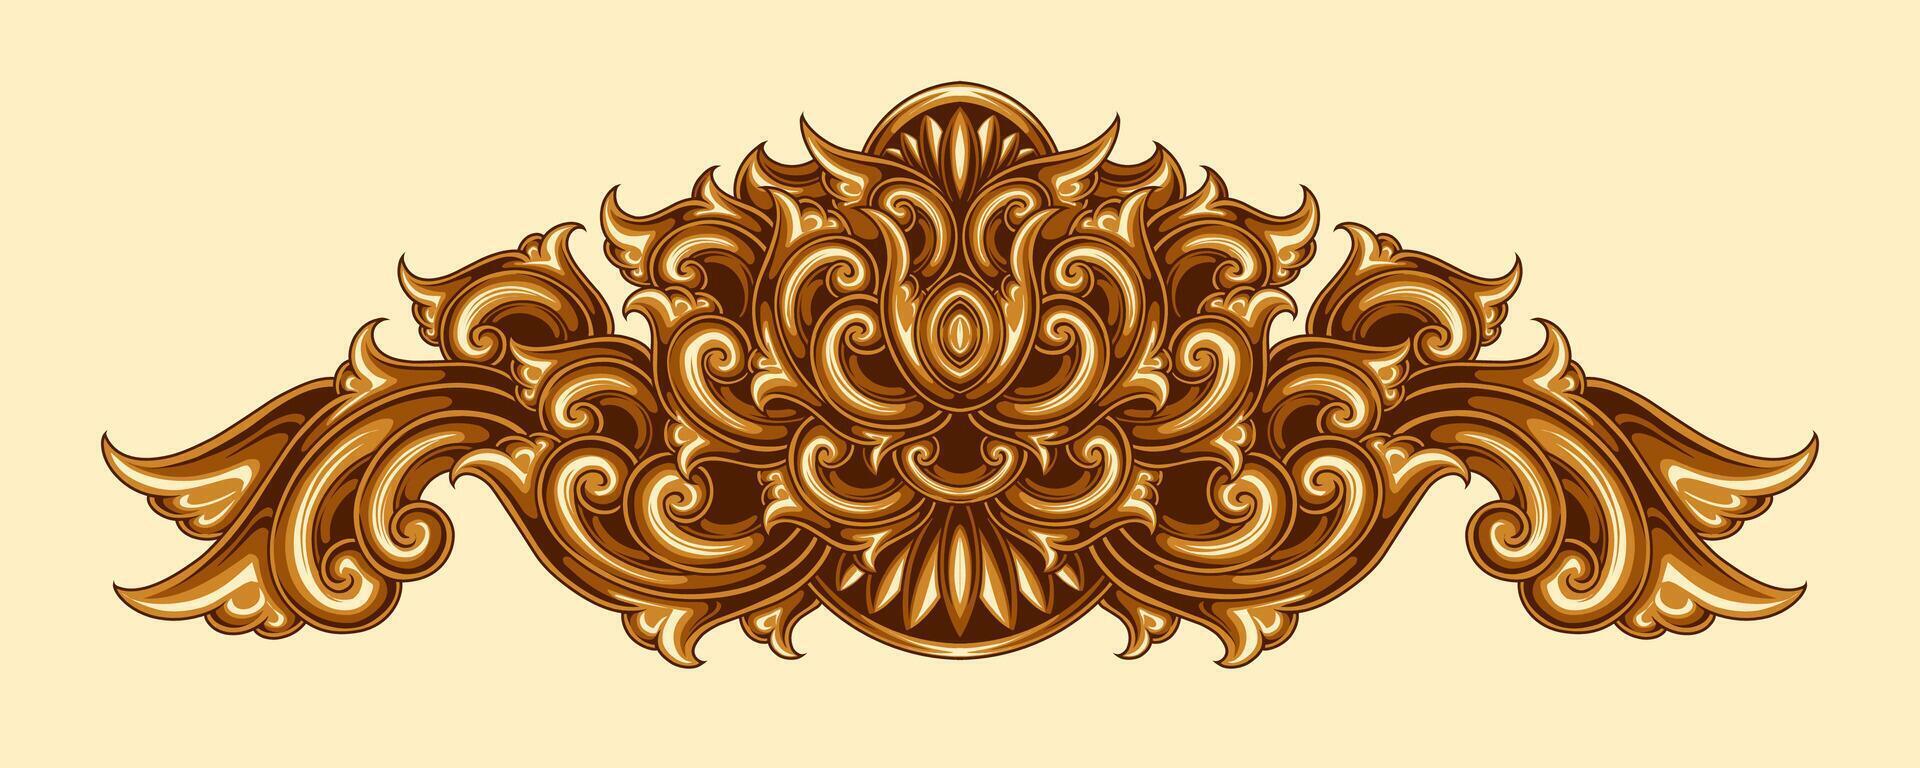 Free vector Classic style frame design with exquisite engraving and luxury